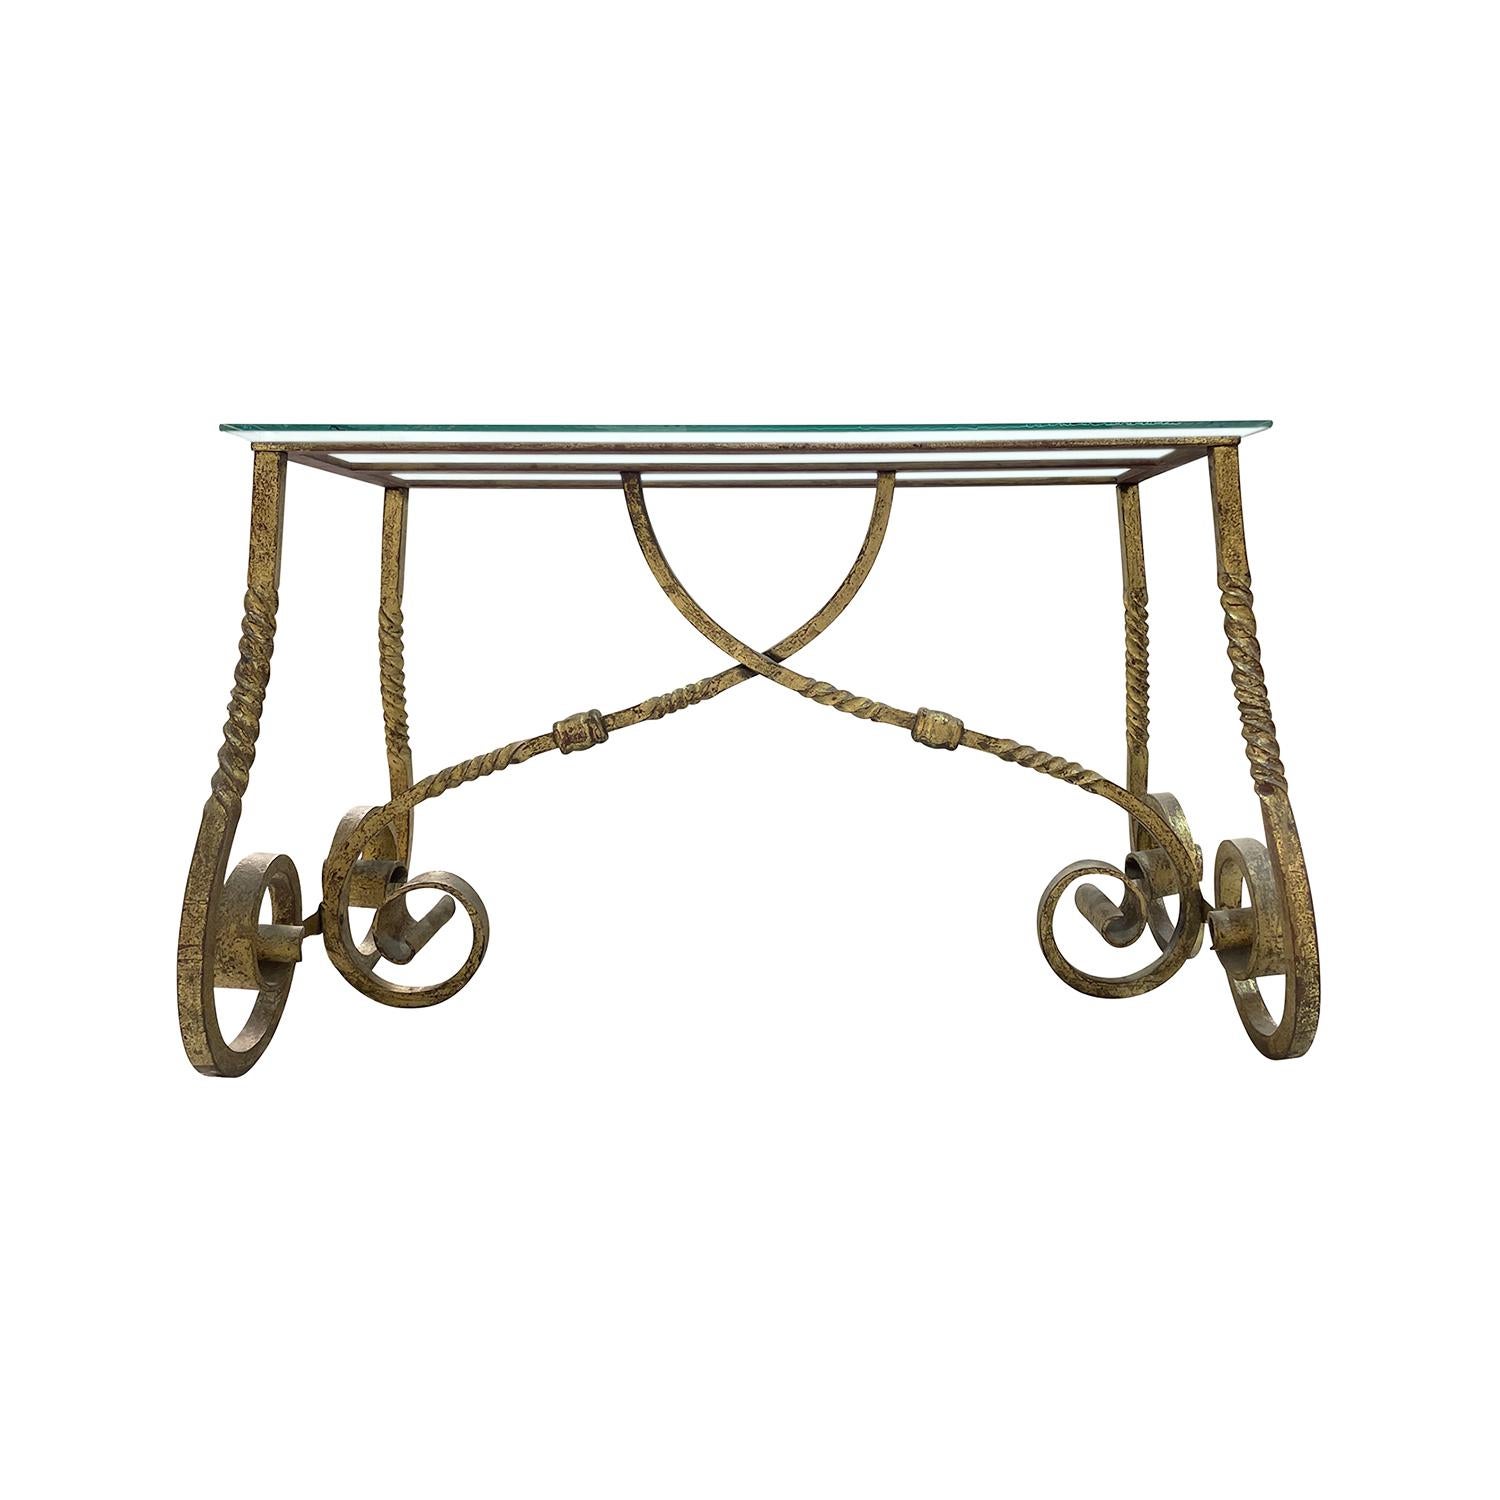 A gold, vintage Art Deco French table d’ore made of handcrafted gilded metal, in good condition. The detailed rectangular side, end table is composed with a clear glass top, standing on four arched legs, supported by two arms, enhanced on each side